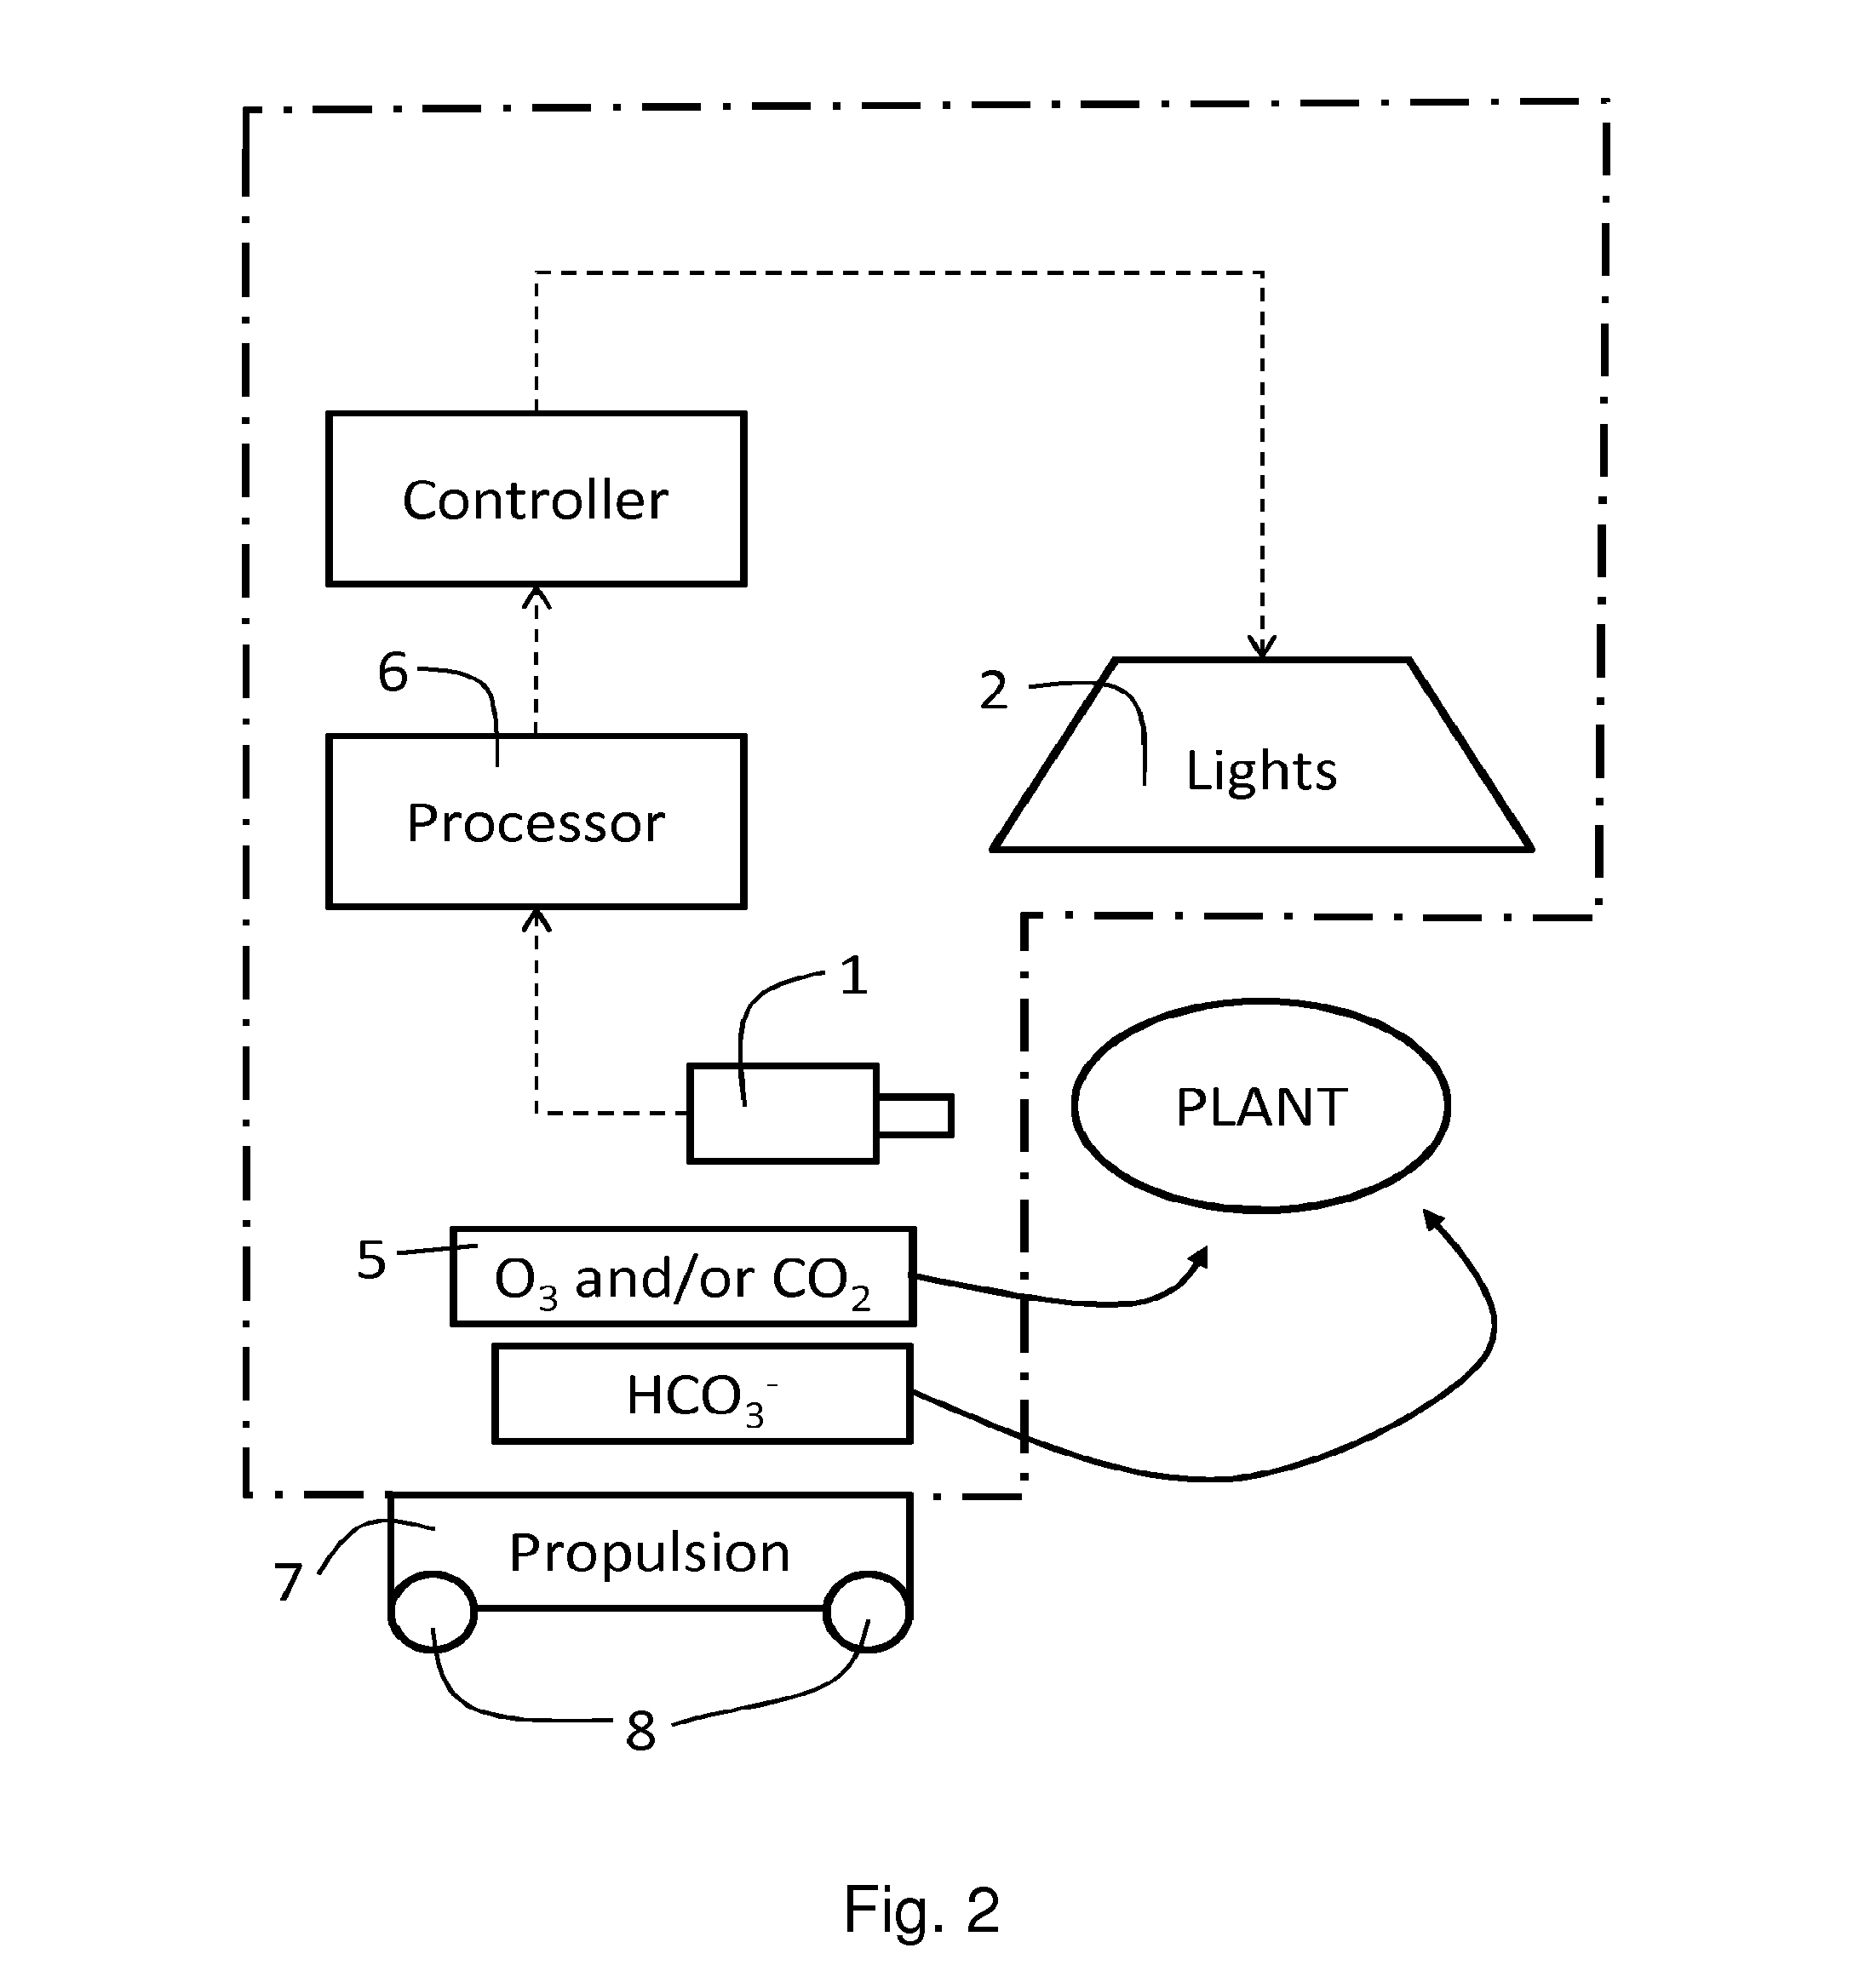 Method and apparatus for improving growth and/or pathogen resistance of a plant using transient high-intensity illumination